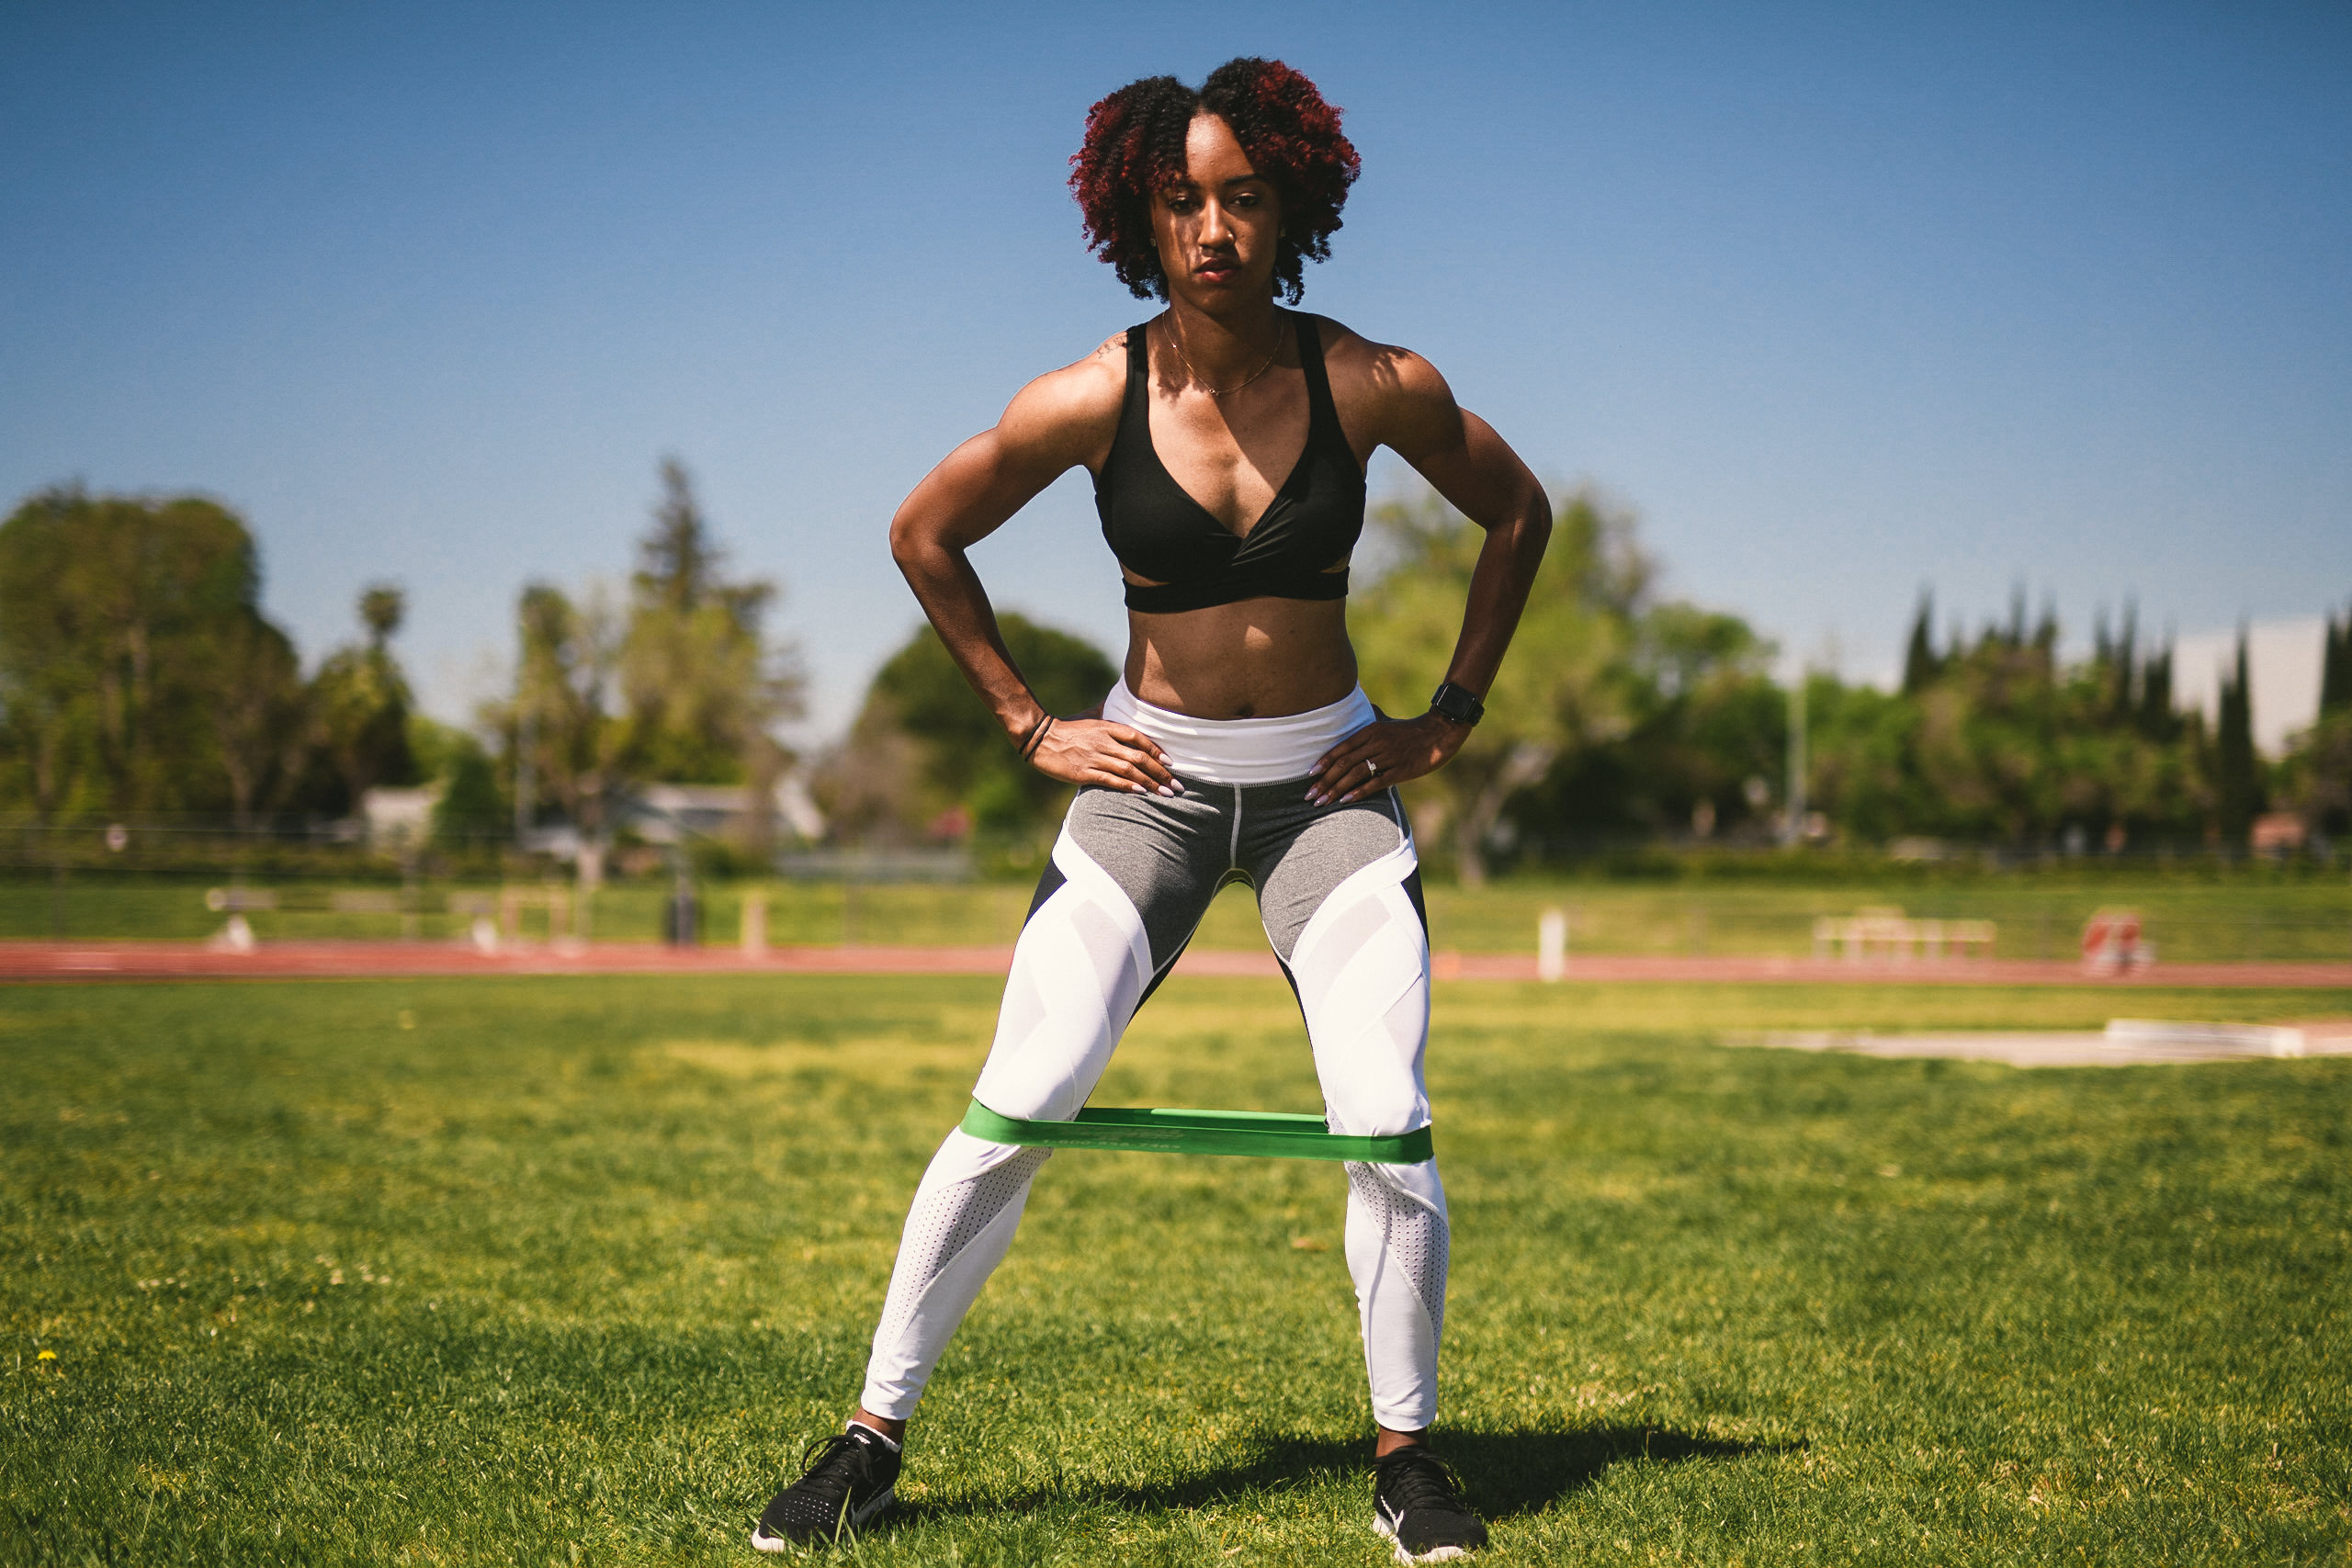 Professional Photography Services to elevate your brand C&I Studios Creative Marketing Kinetix 365 Woman posing for camera on a track field in track outfit using rubber band for stretching